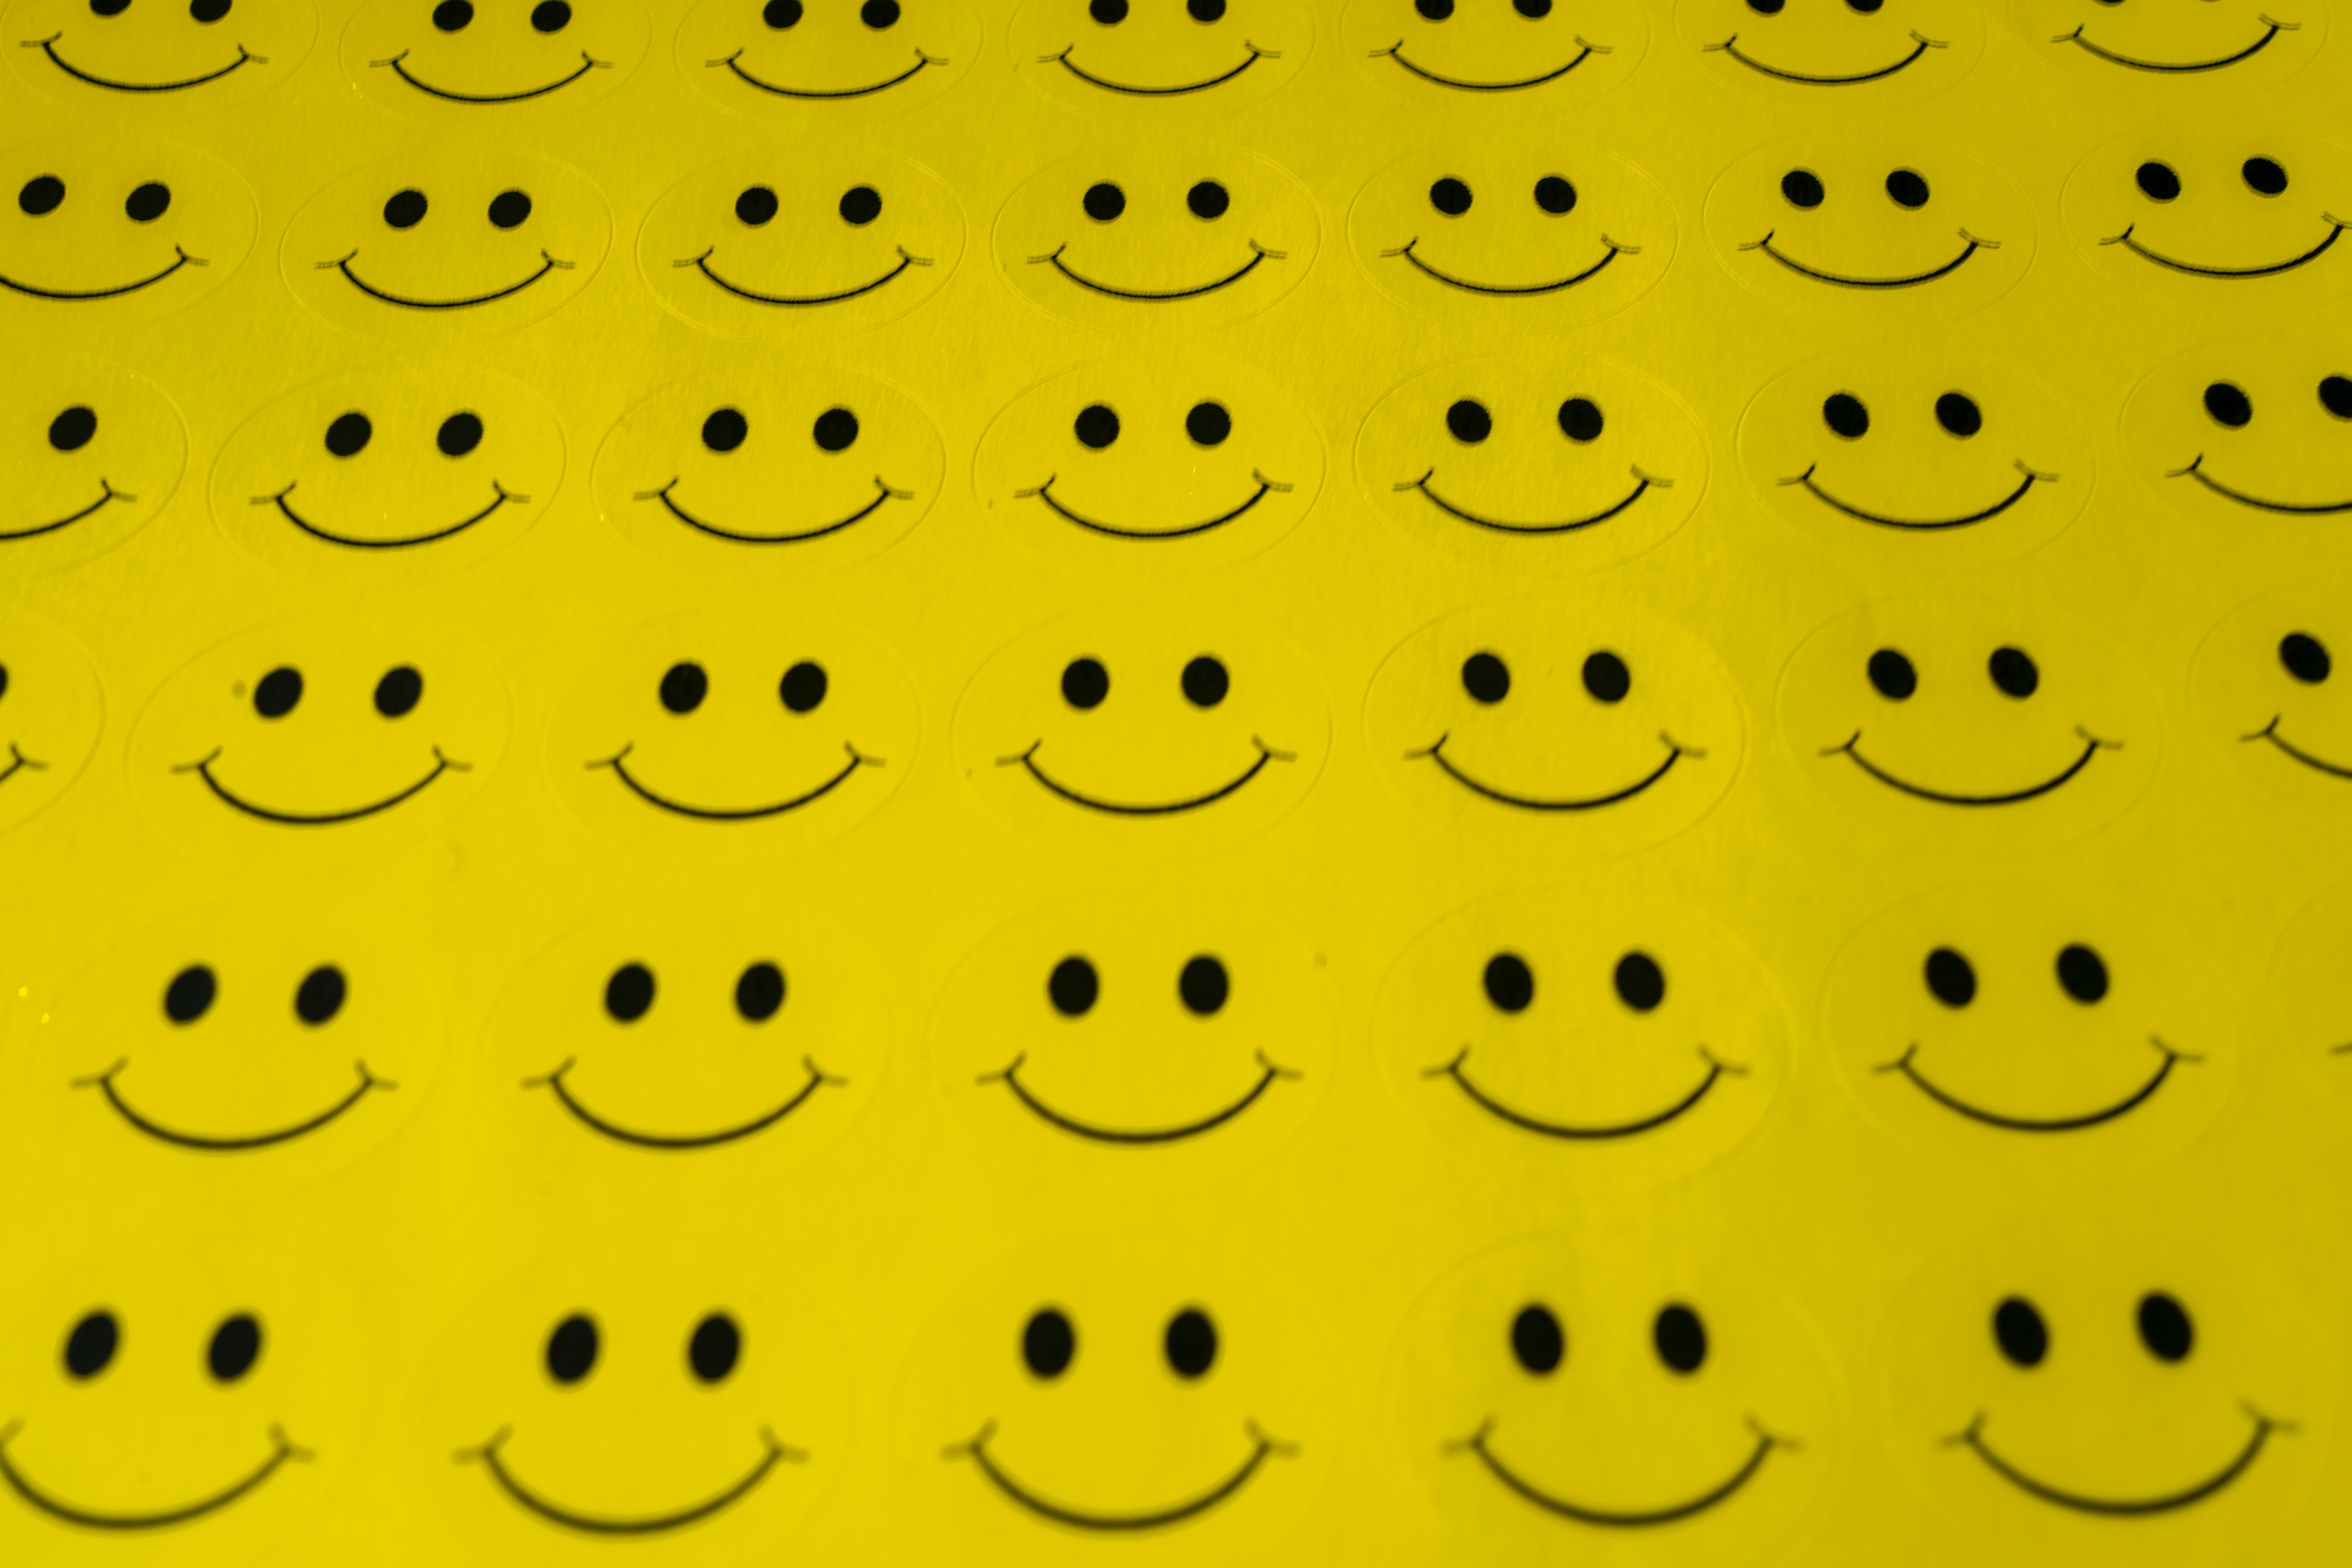 Rows and rows of yellow happy face stickers